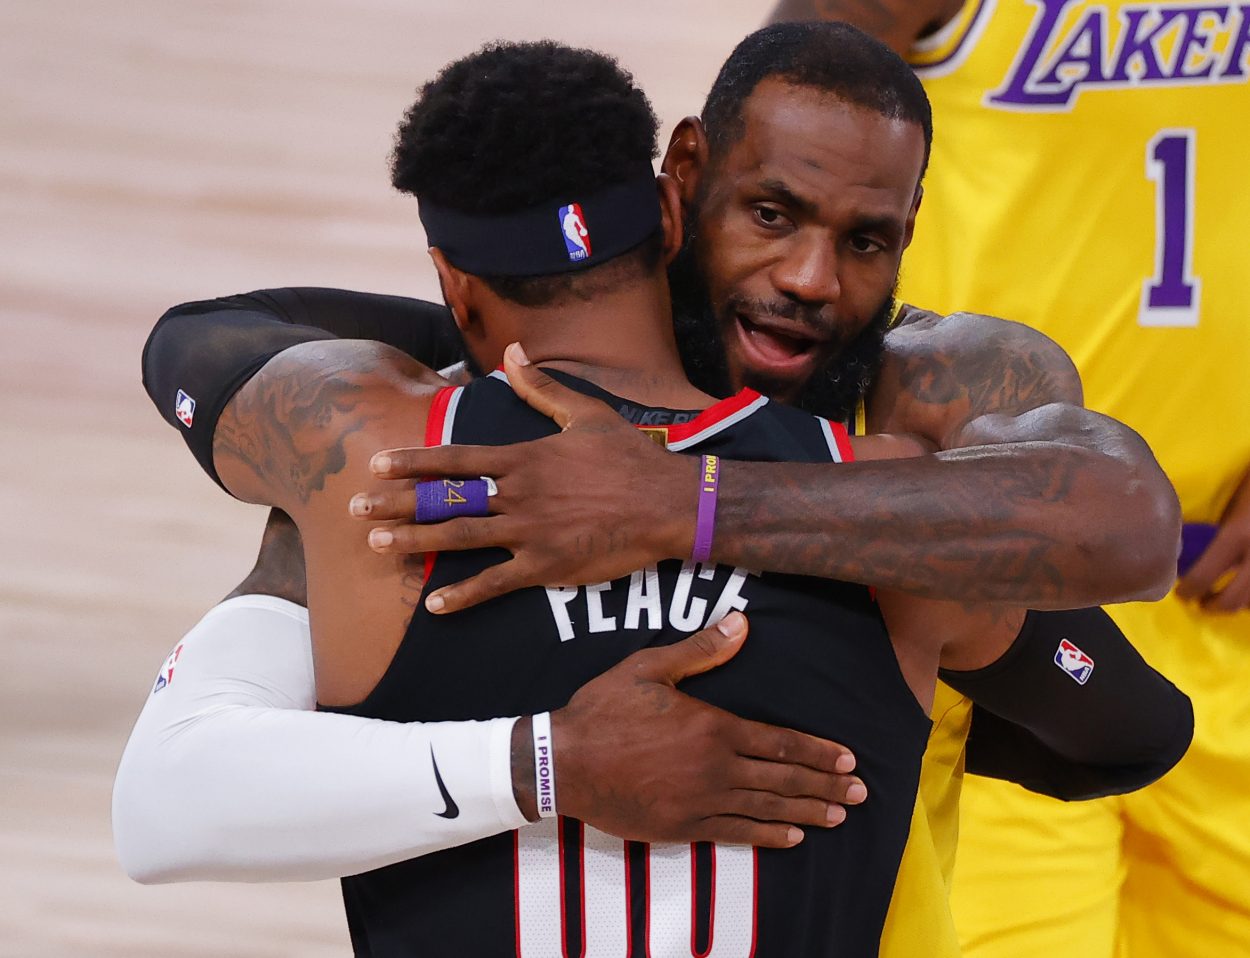 LeBron James Effusively Praises Carmelo Anthony For Desperately Clinging to His NBA Dream